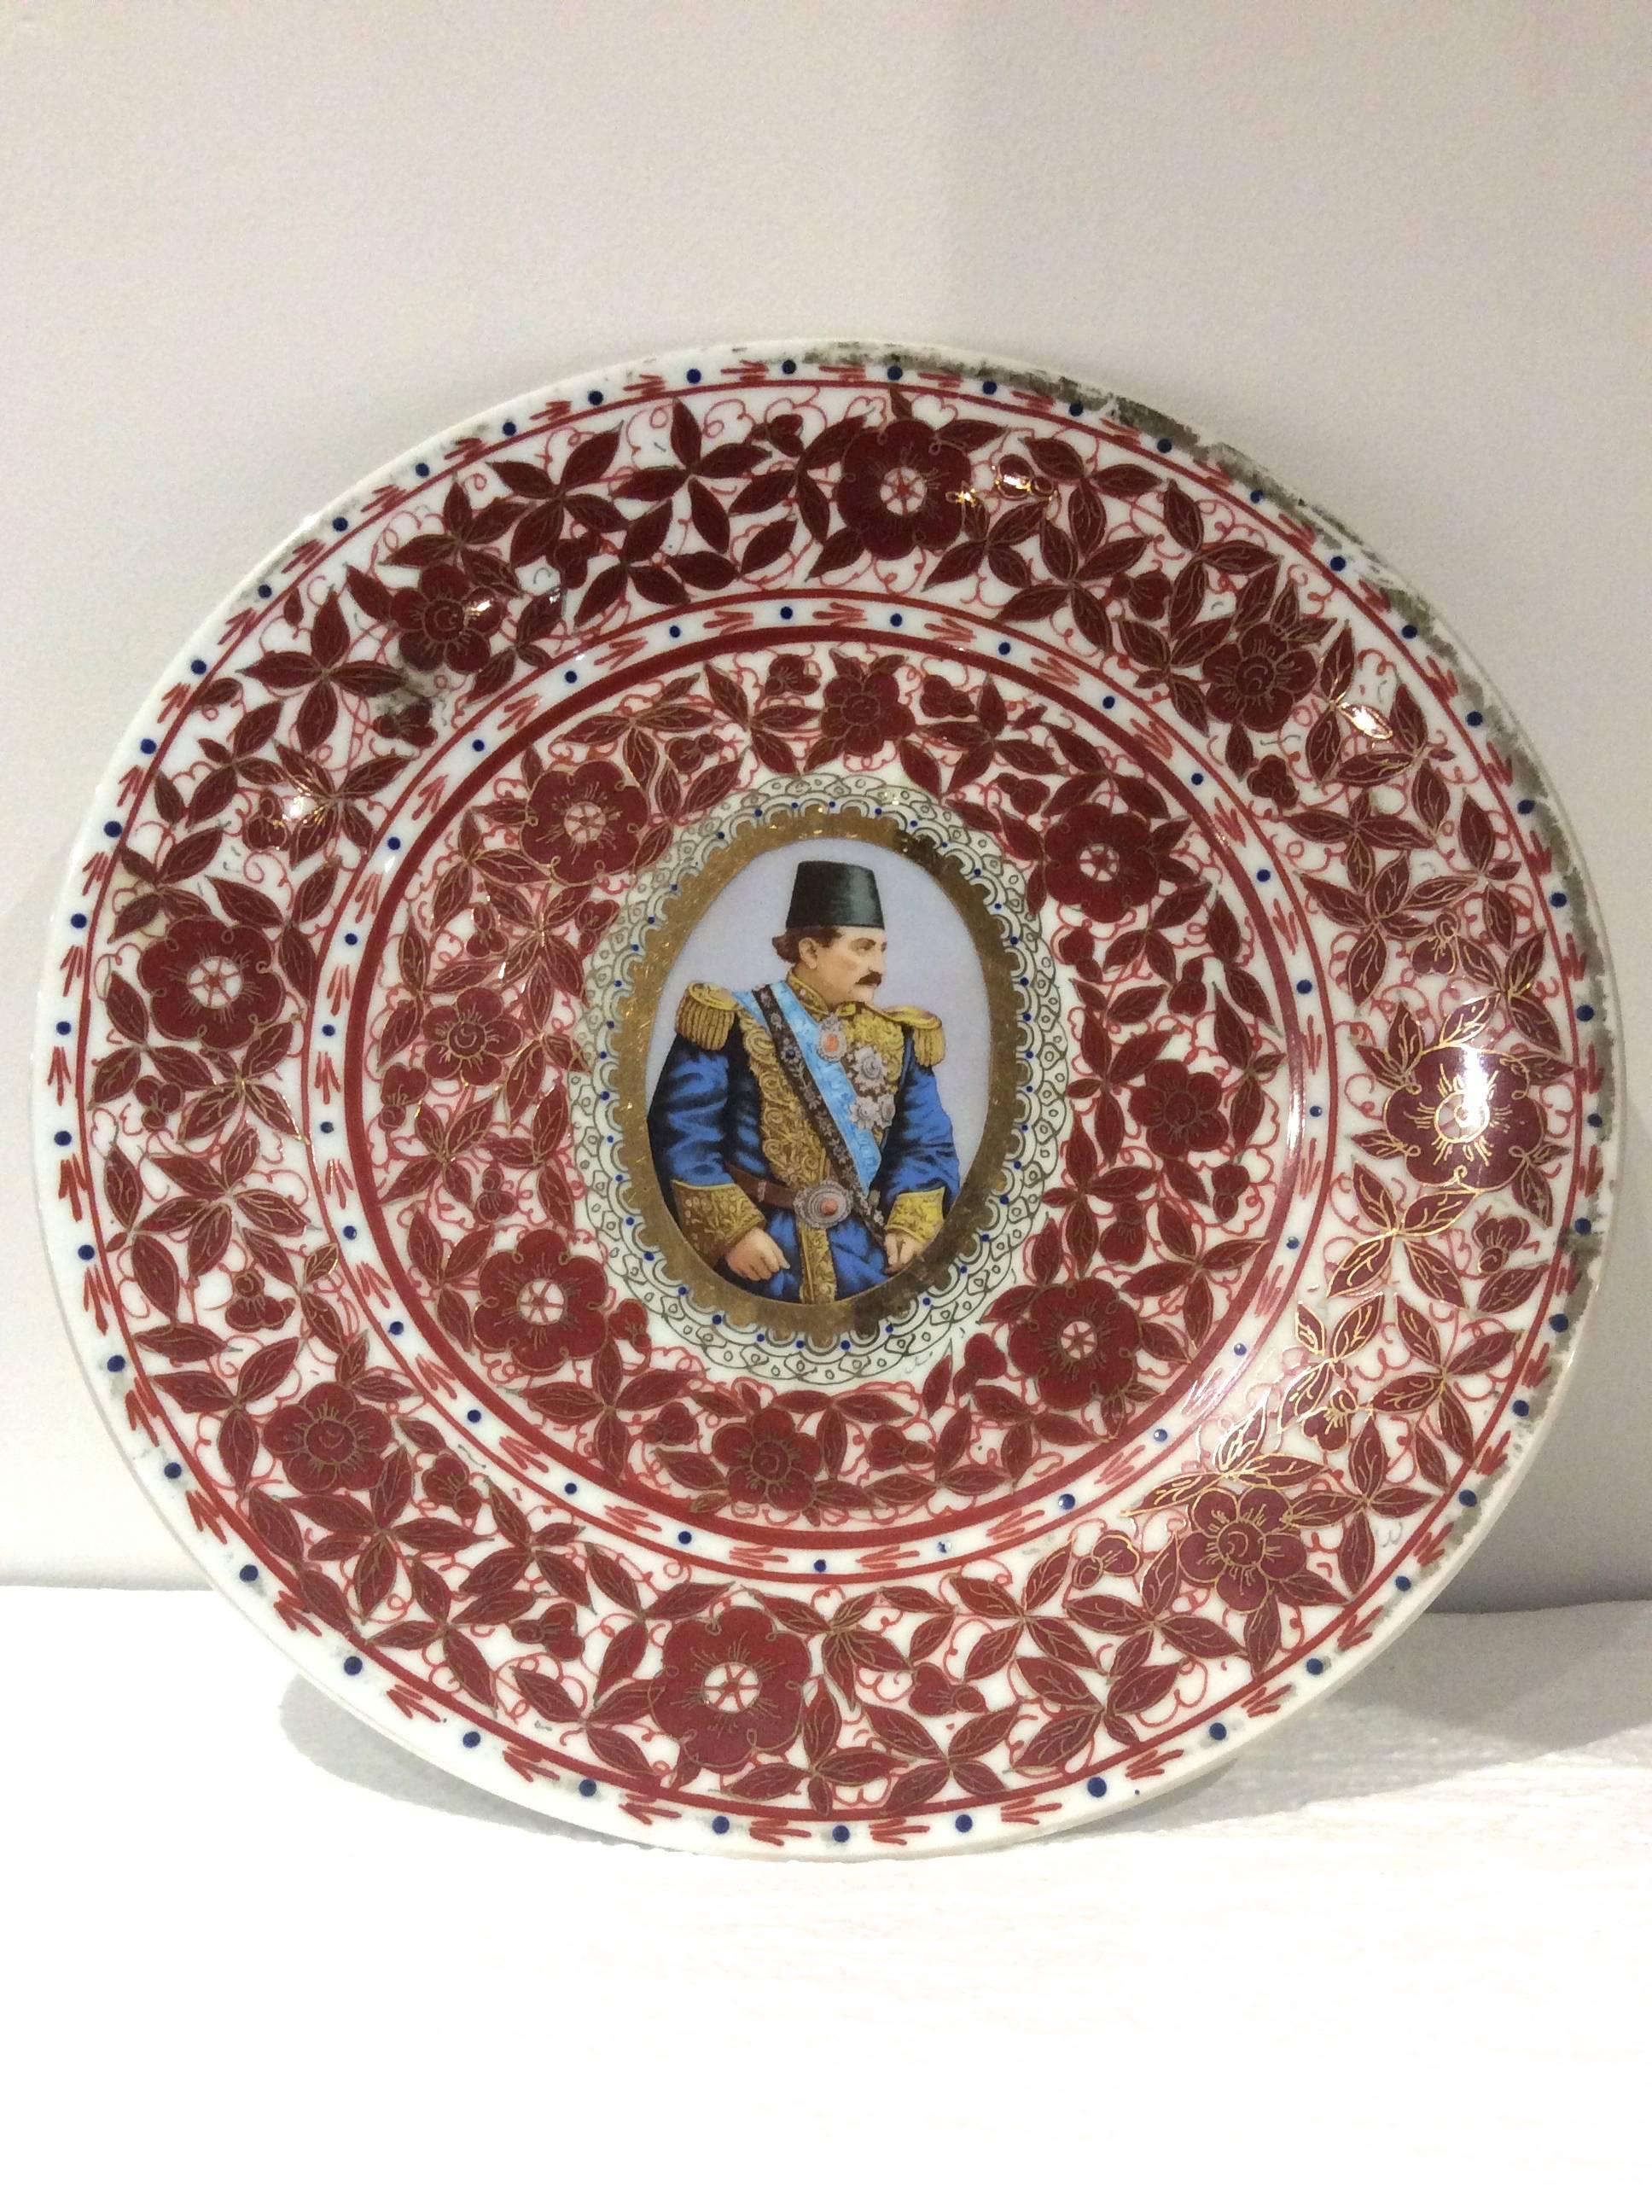 A set of six late 19th century ceramic Qajar plates featuring various Eastern Potentates. They are decorated in colorful foliate and floral motifs. The main colors include blue, red and gold. They are featuring large gilt central medallions